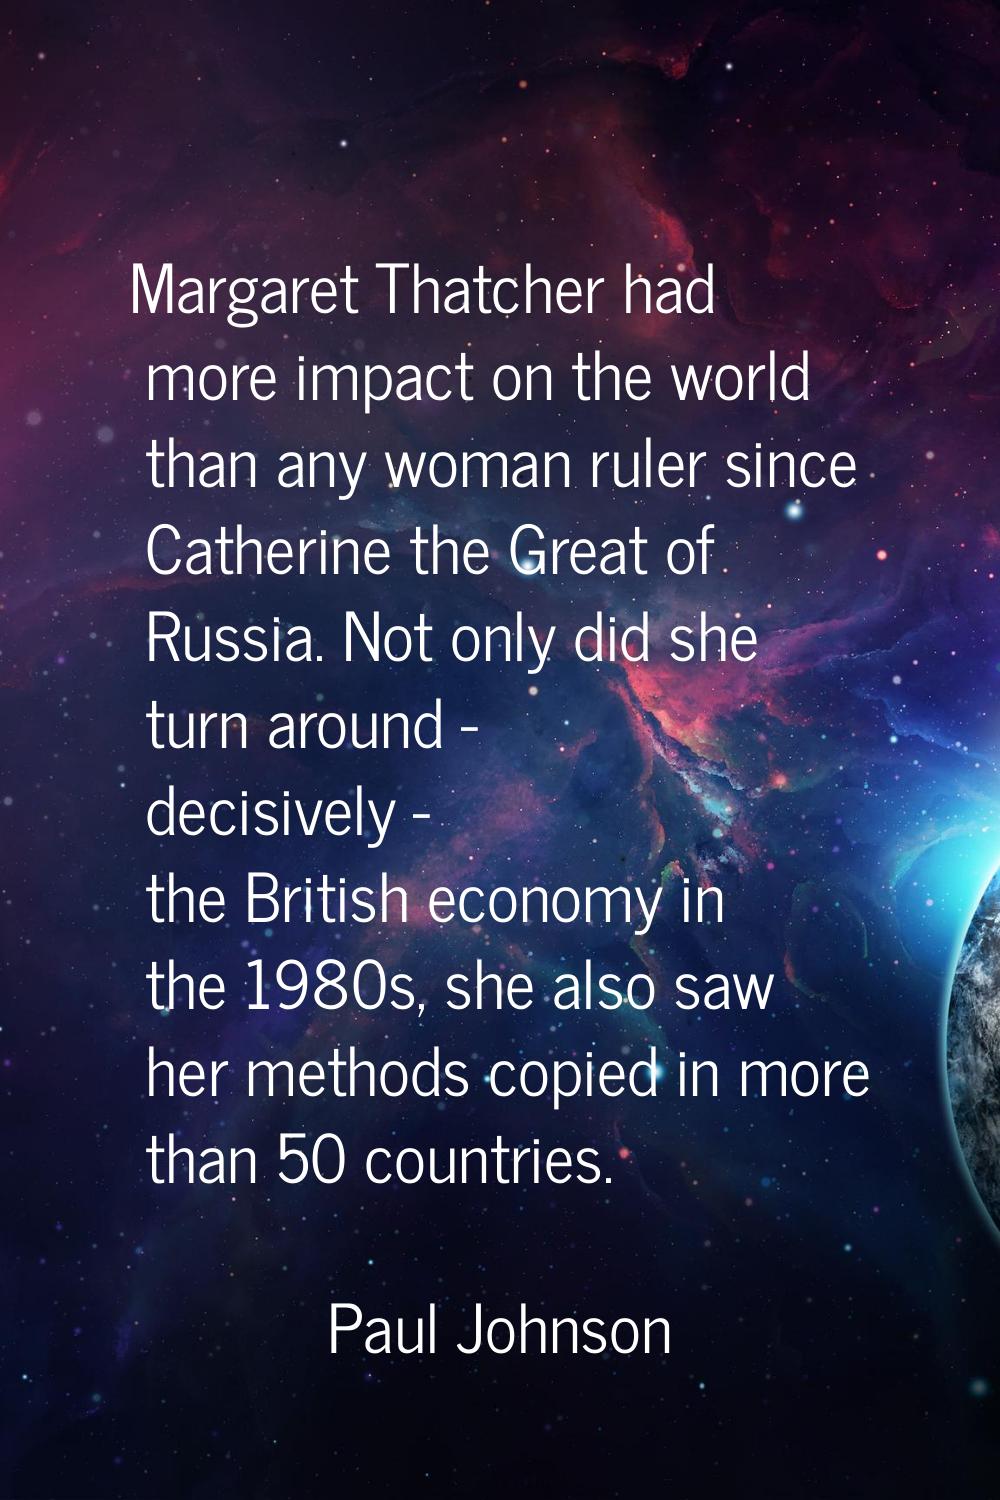 Margaret Thatcher had more impact on the world than any woman ruler since Catherine the Great of Ru